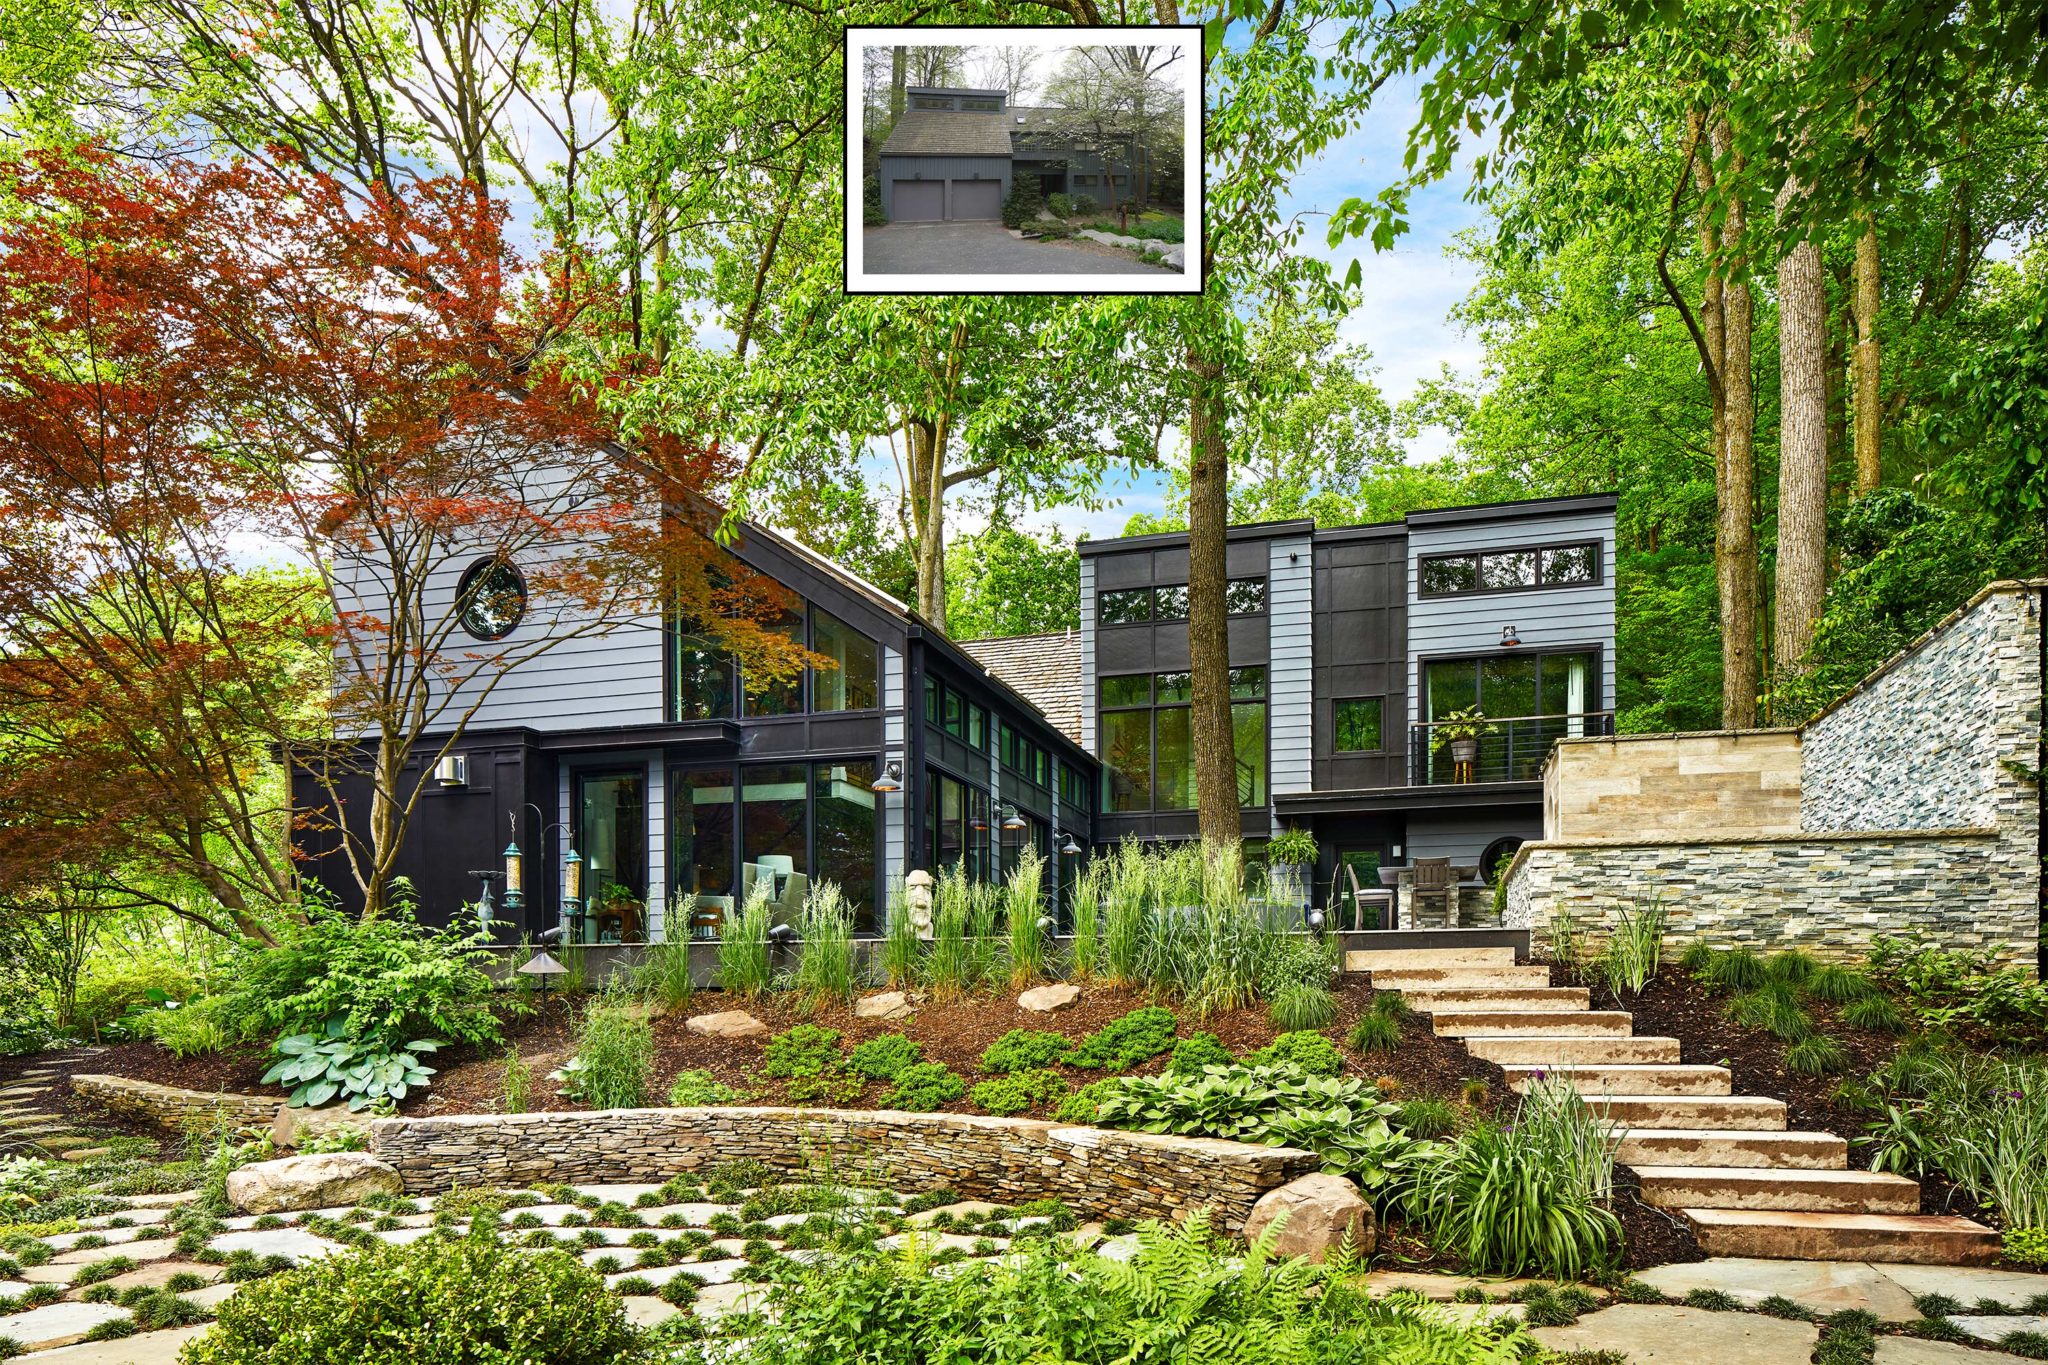 This Industrial-Modern Lake House Near DC Used to Be Dark and Dated